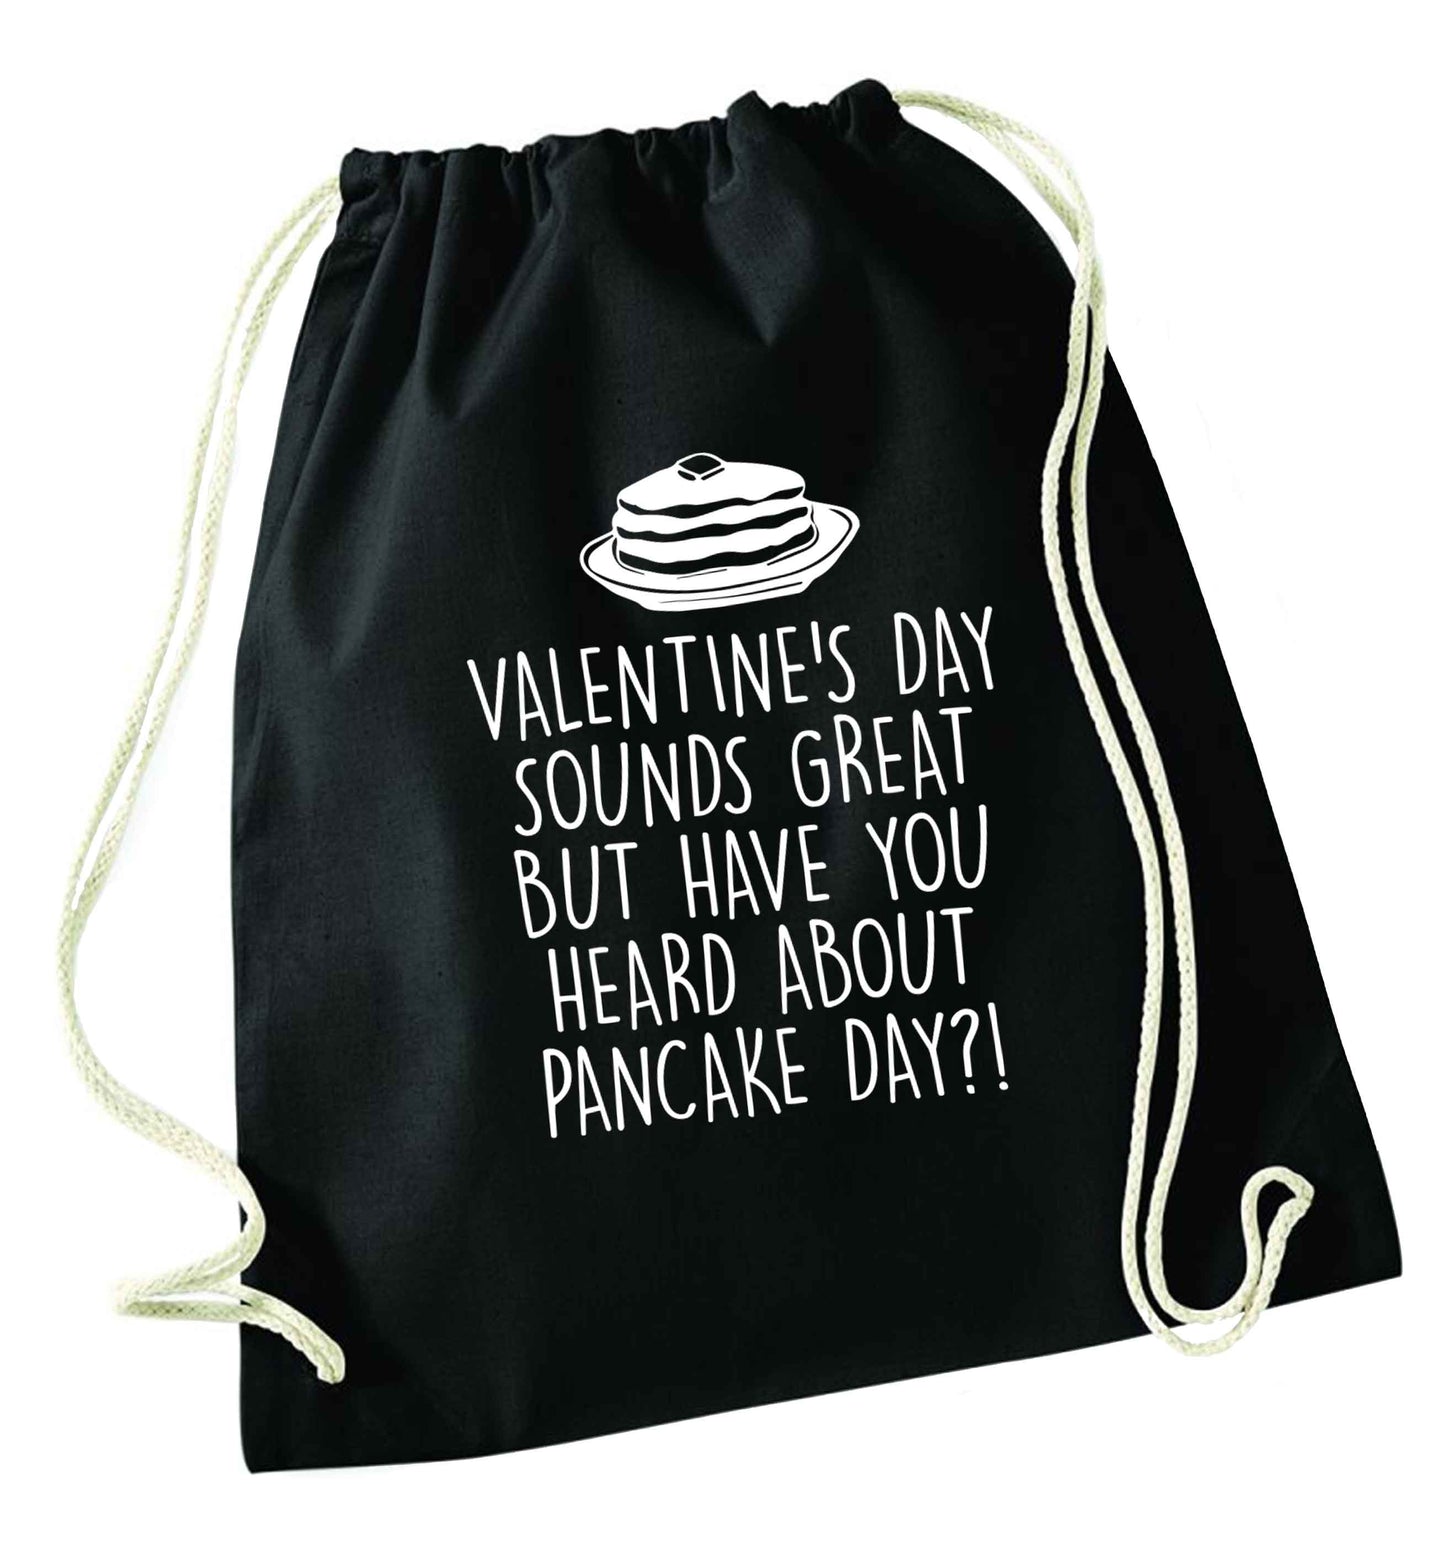 Valentine's day sounds great but have you heard about pancake day?! black drawstring bag